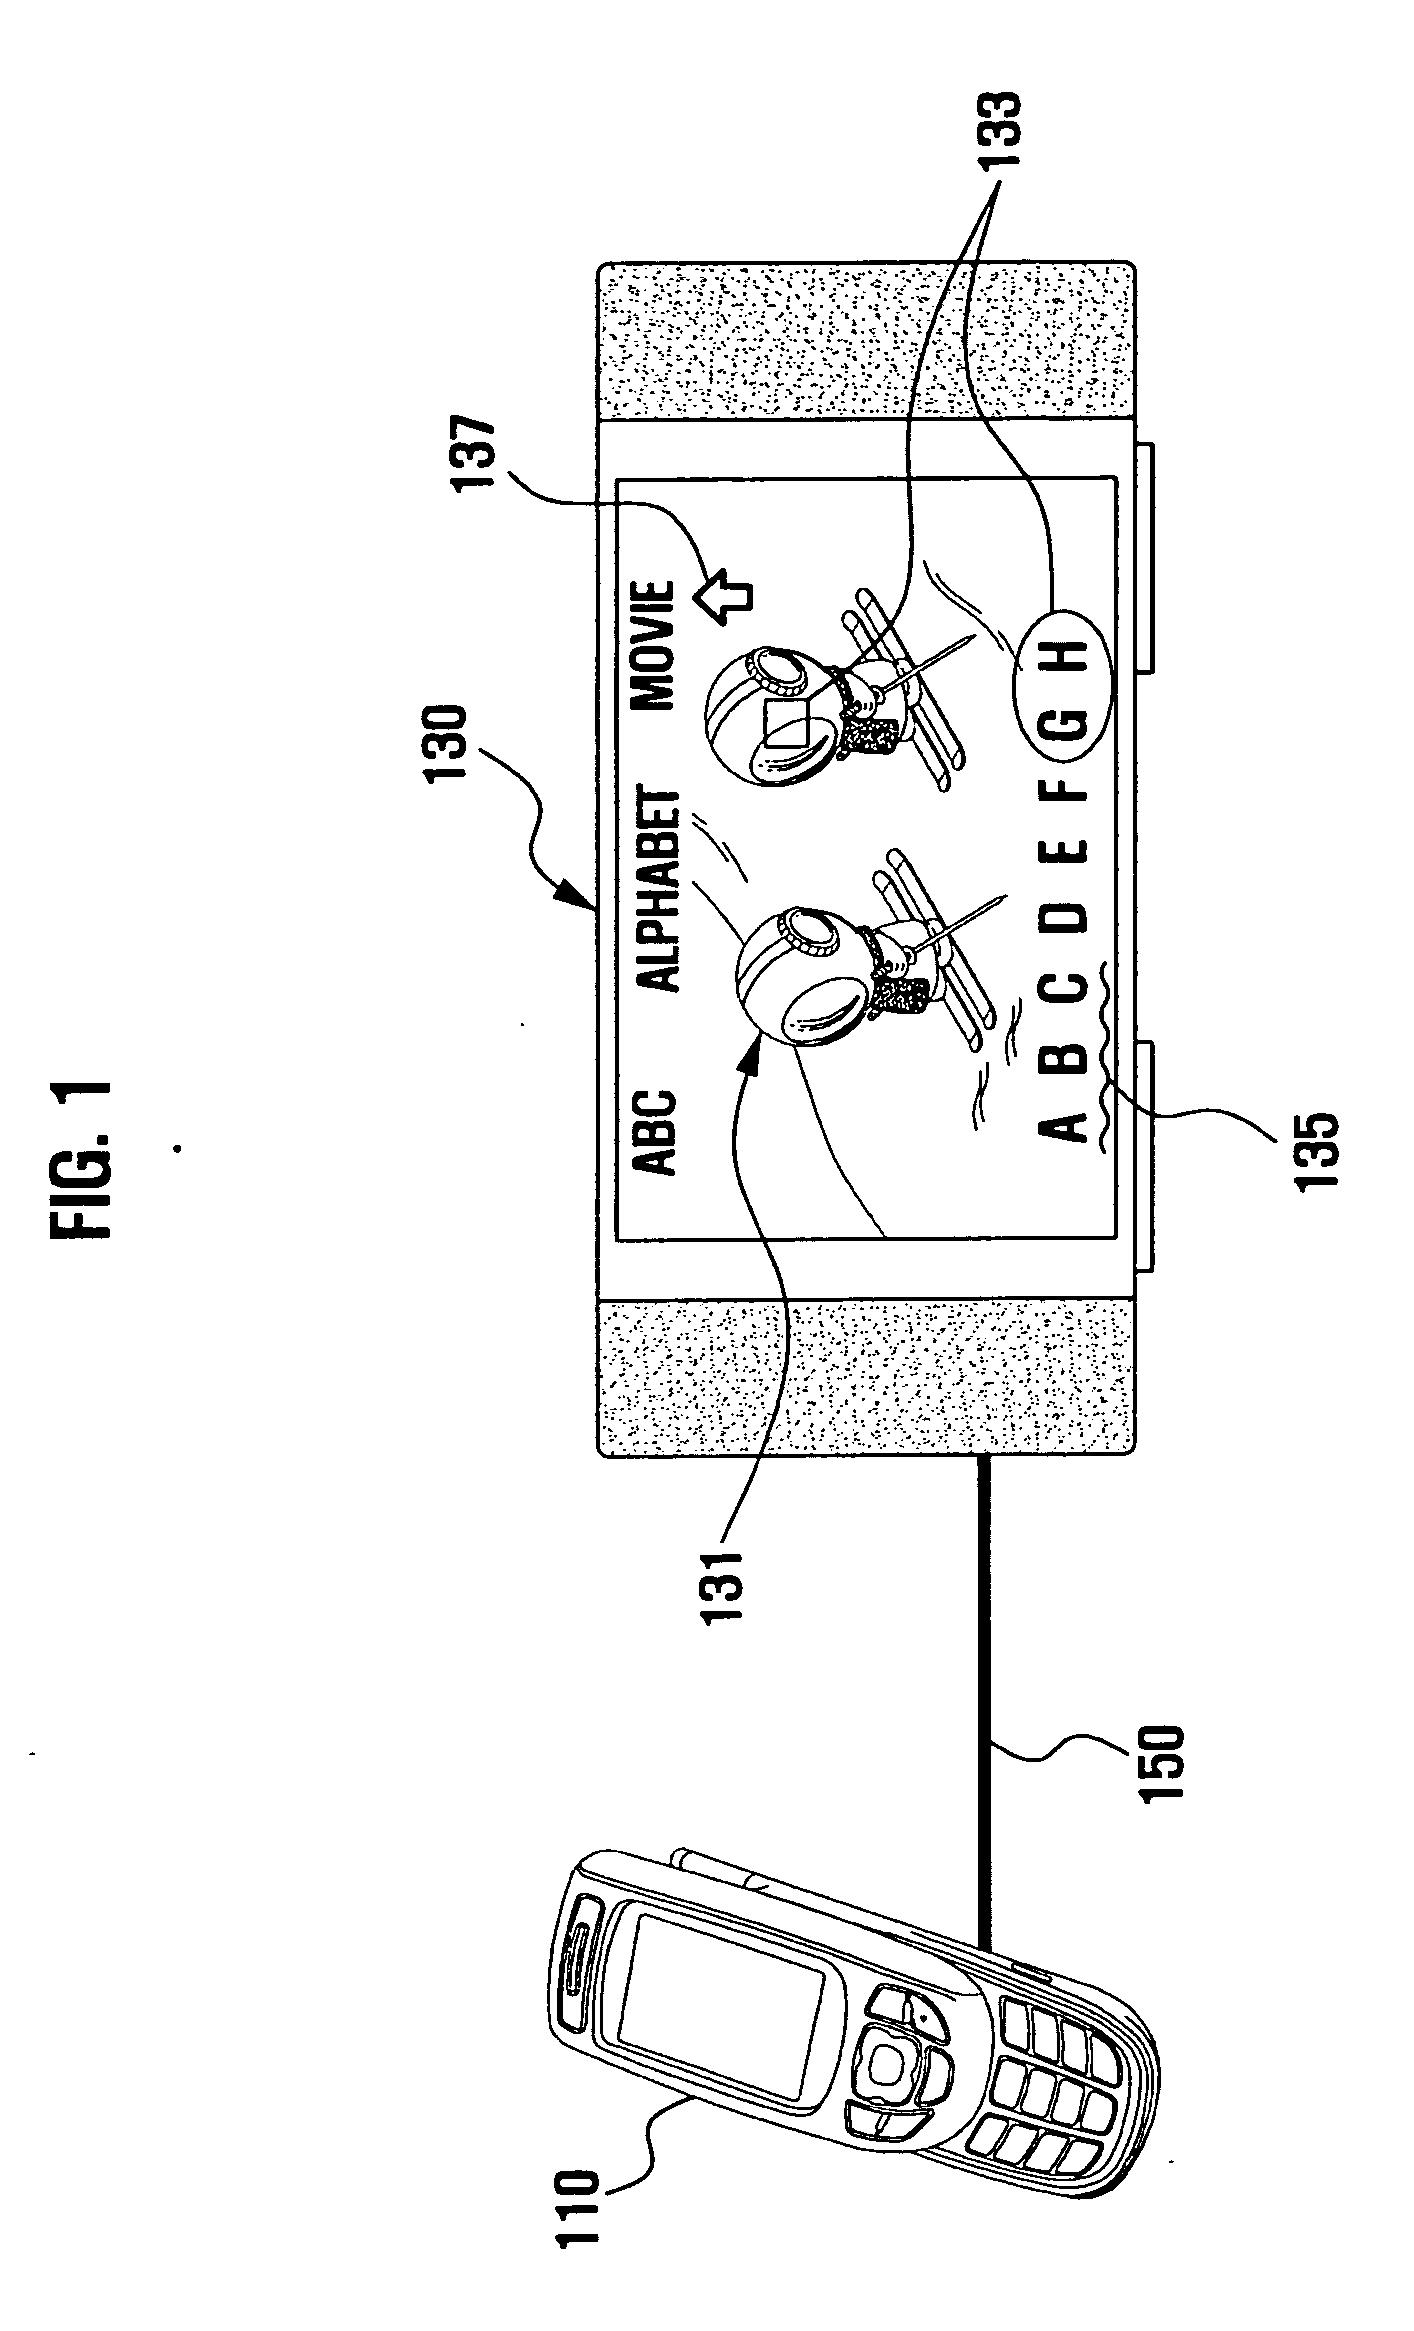 Display method and system for portable device using external display device